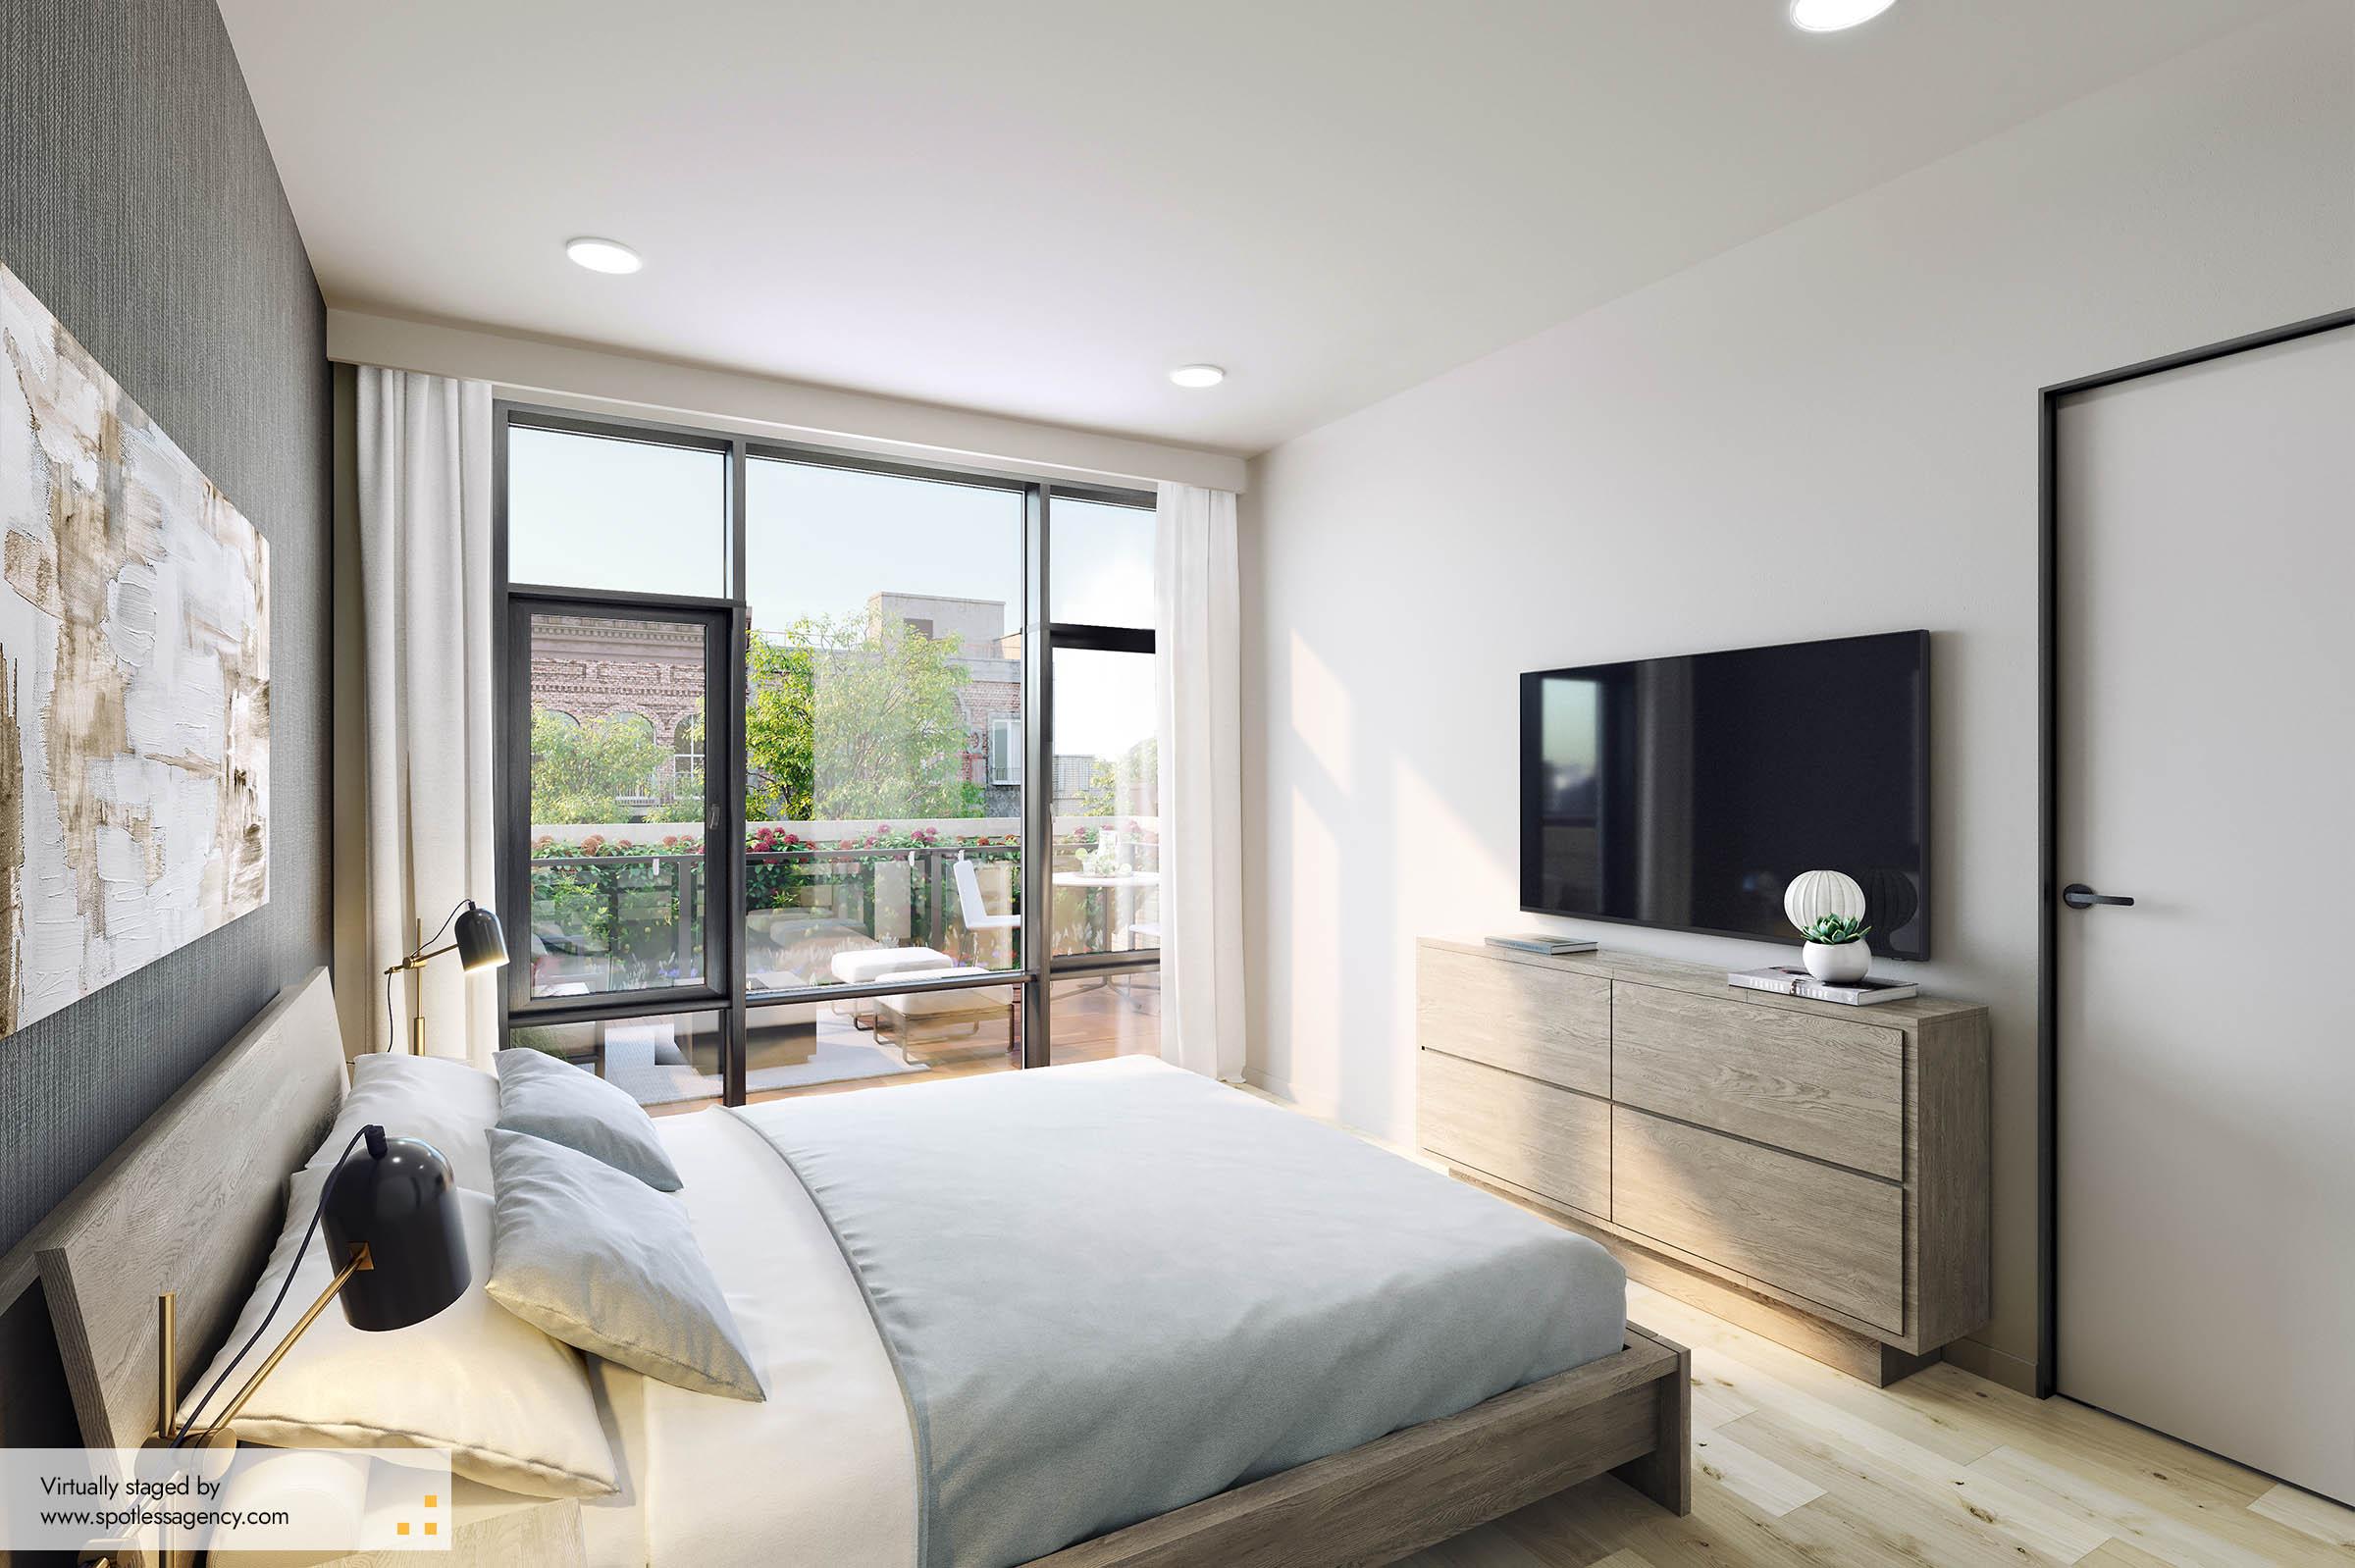 Second-Bedroom Virtual Staging